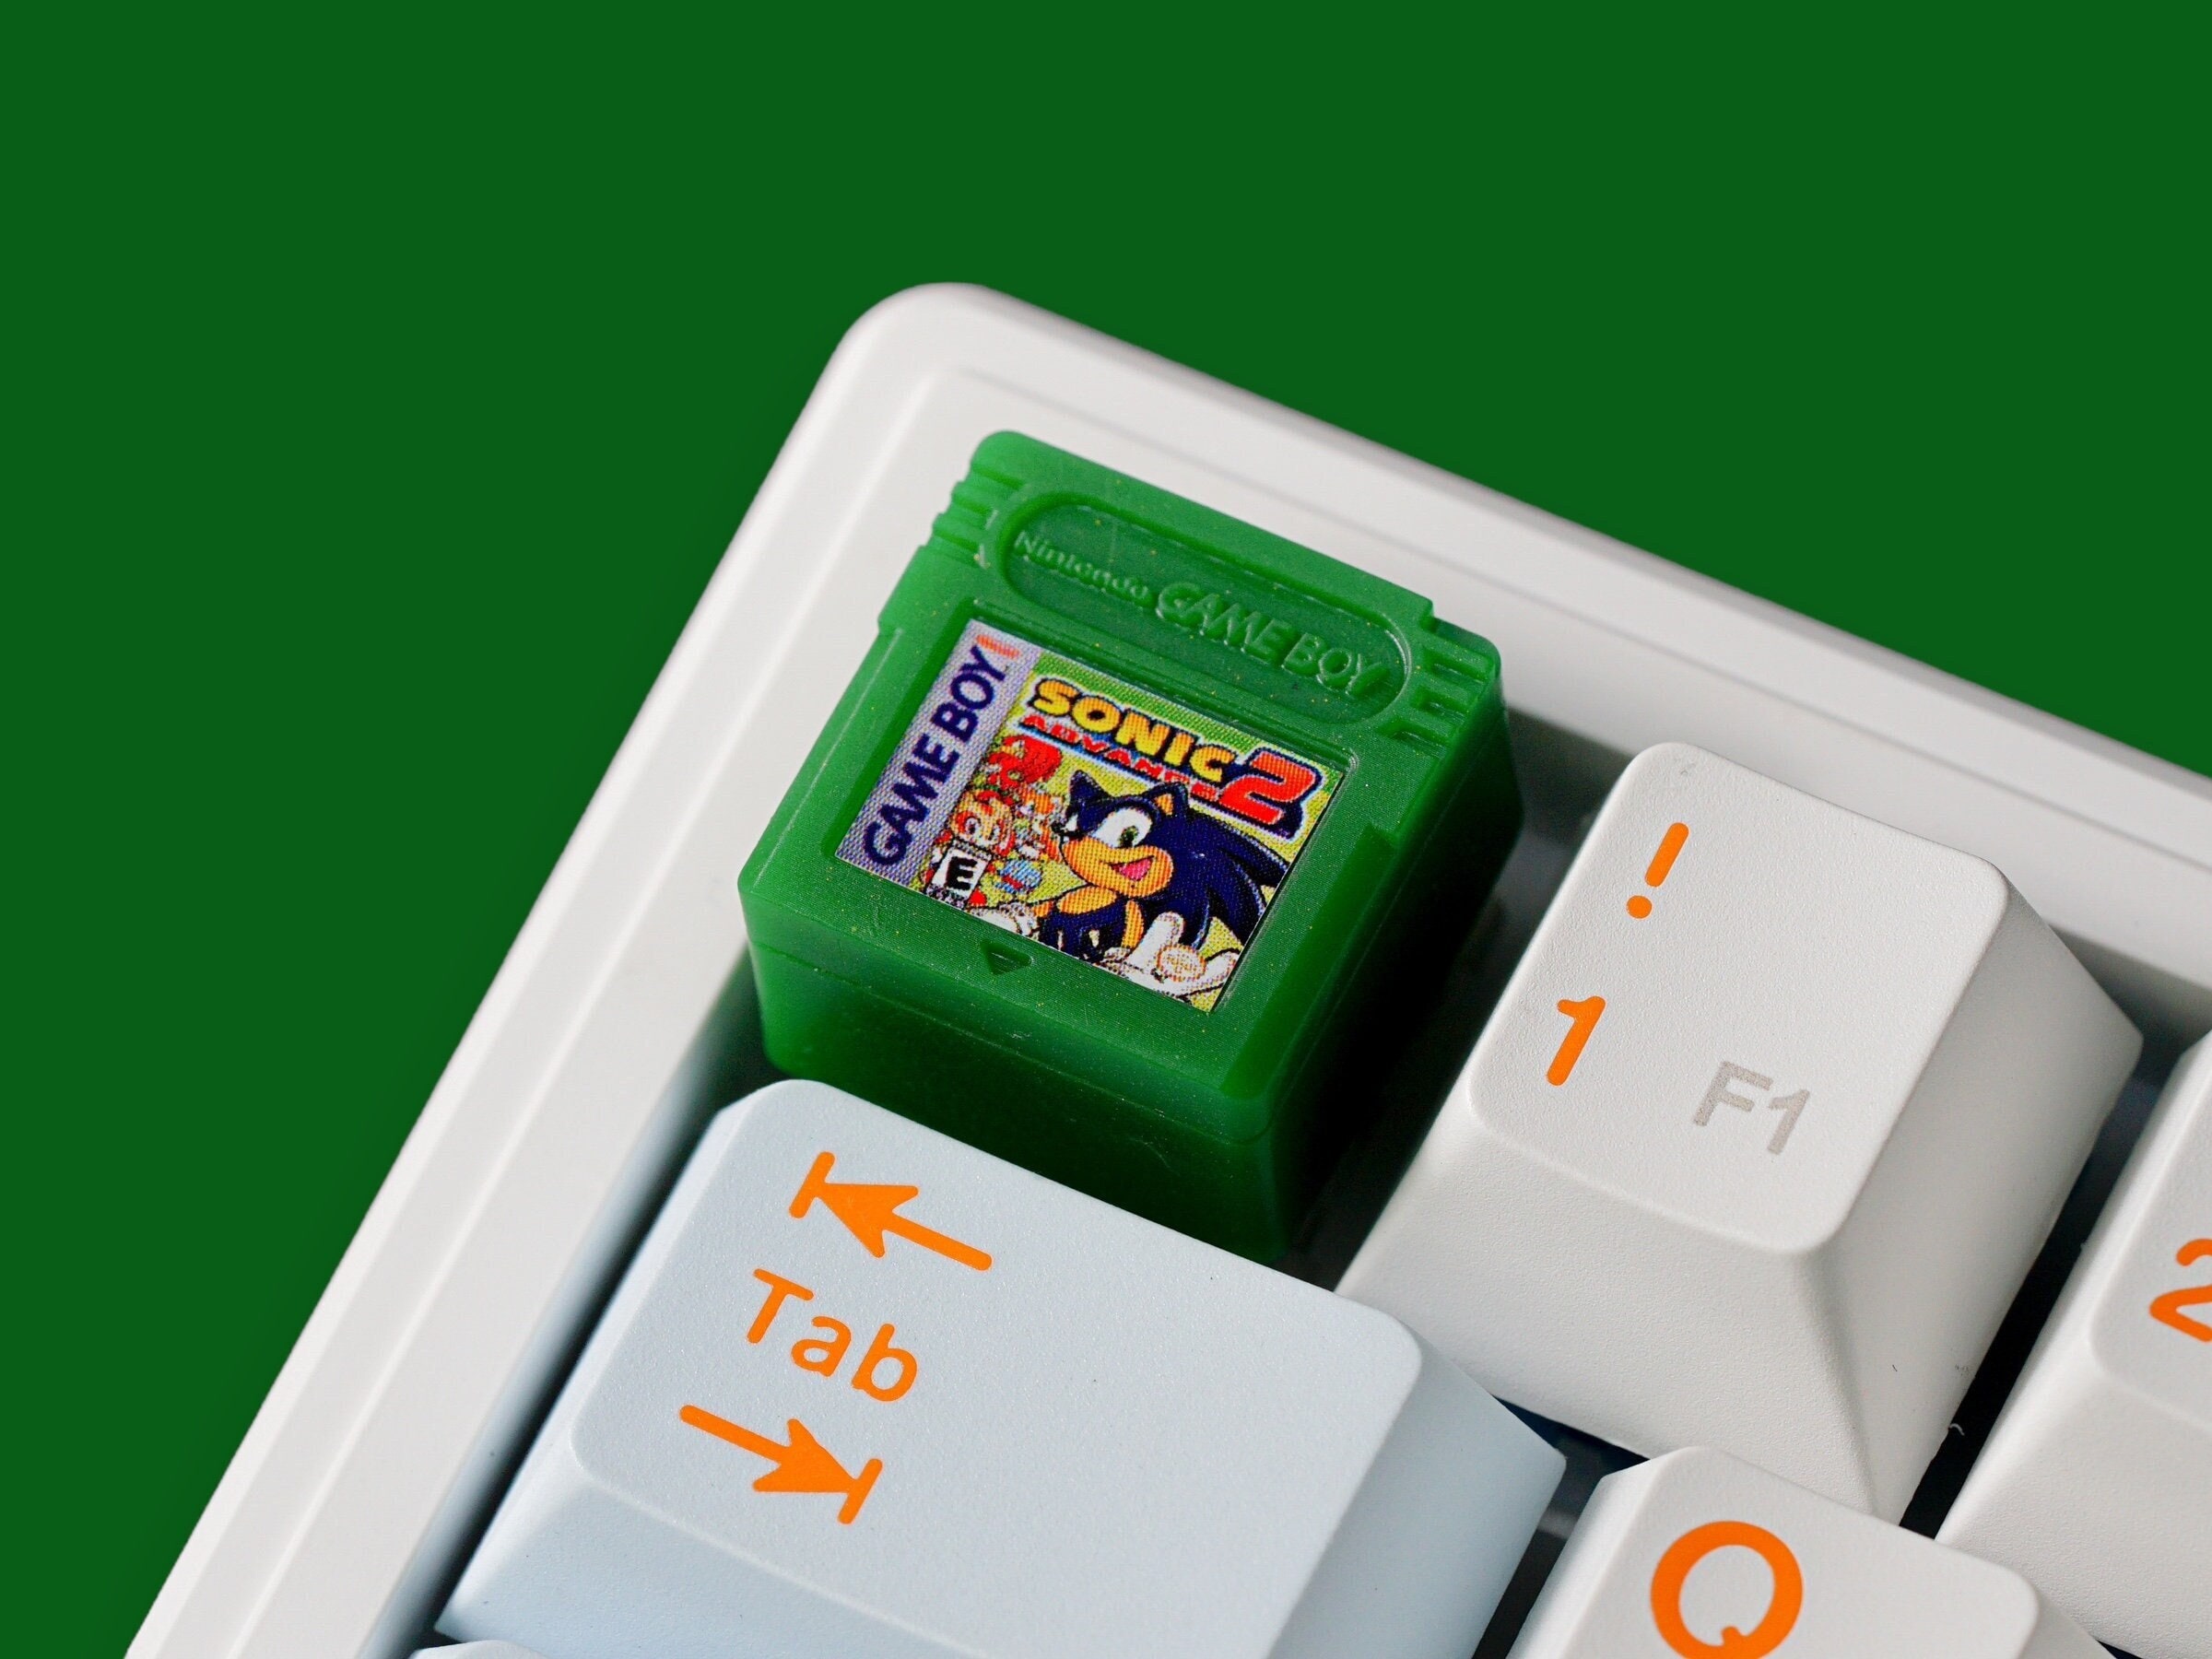 Gameboy Keycap, Sonic 2 Gameboy Keycap, Gaming Keycap, Keycap For Cherry MX Switches Mechanical Keyboard, Gift for Him